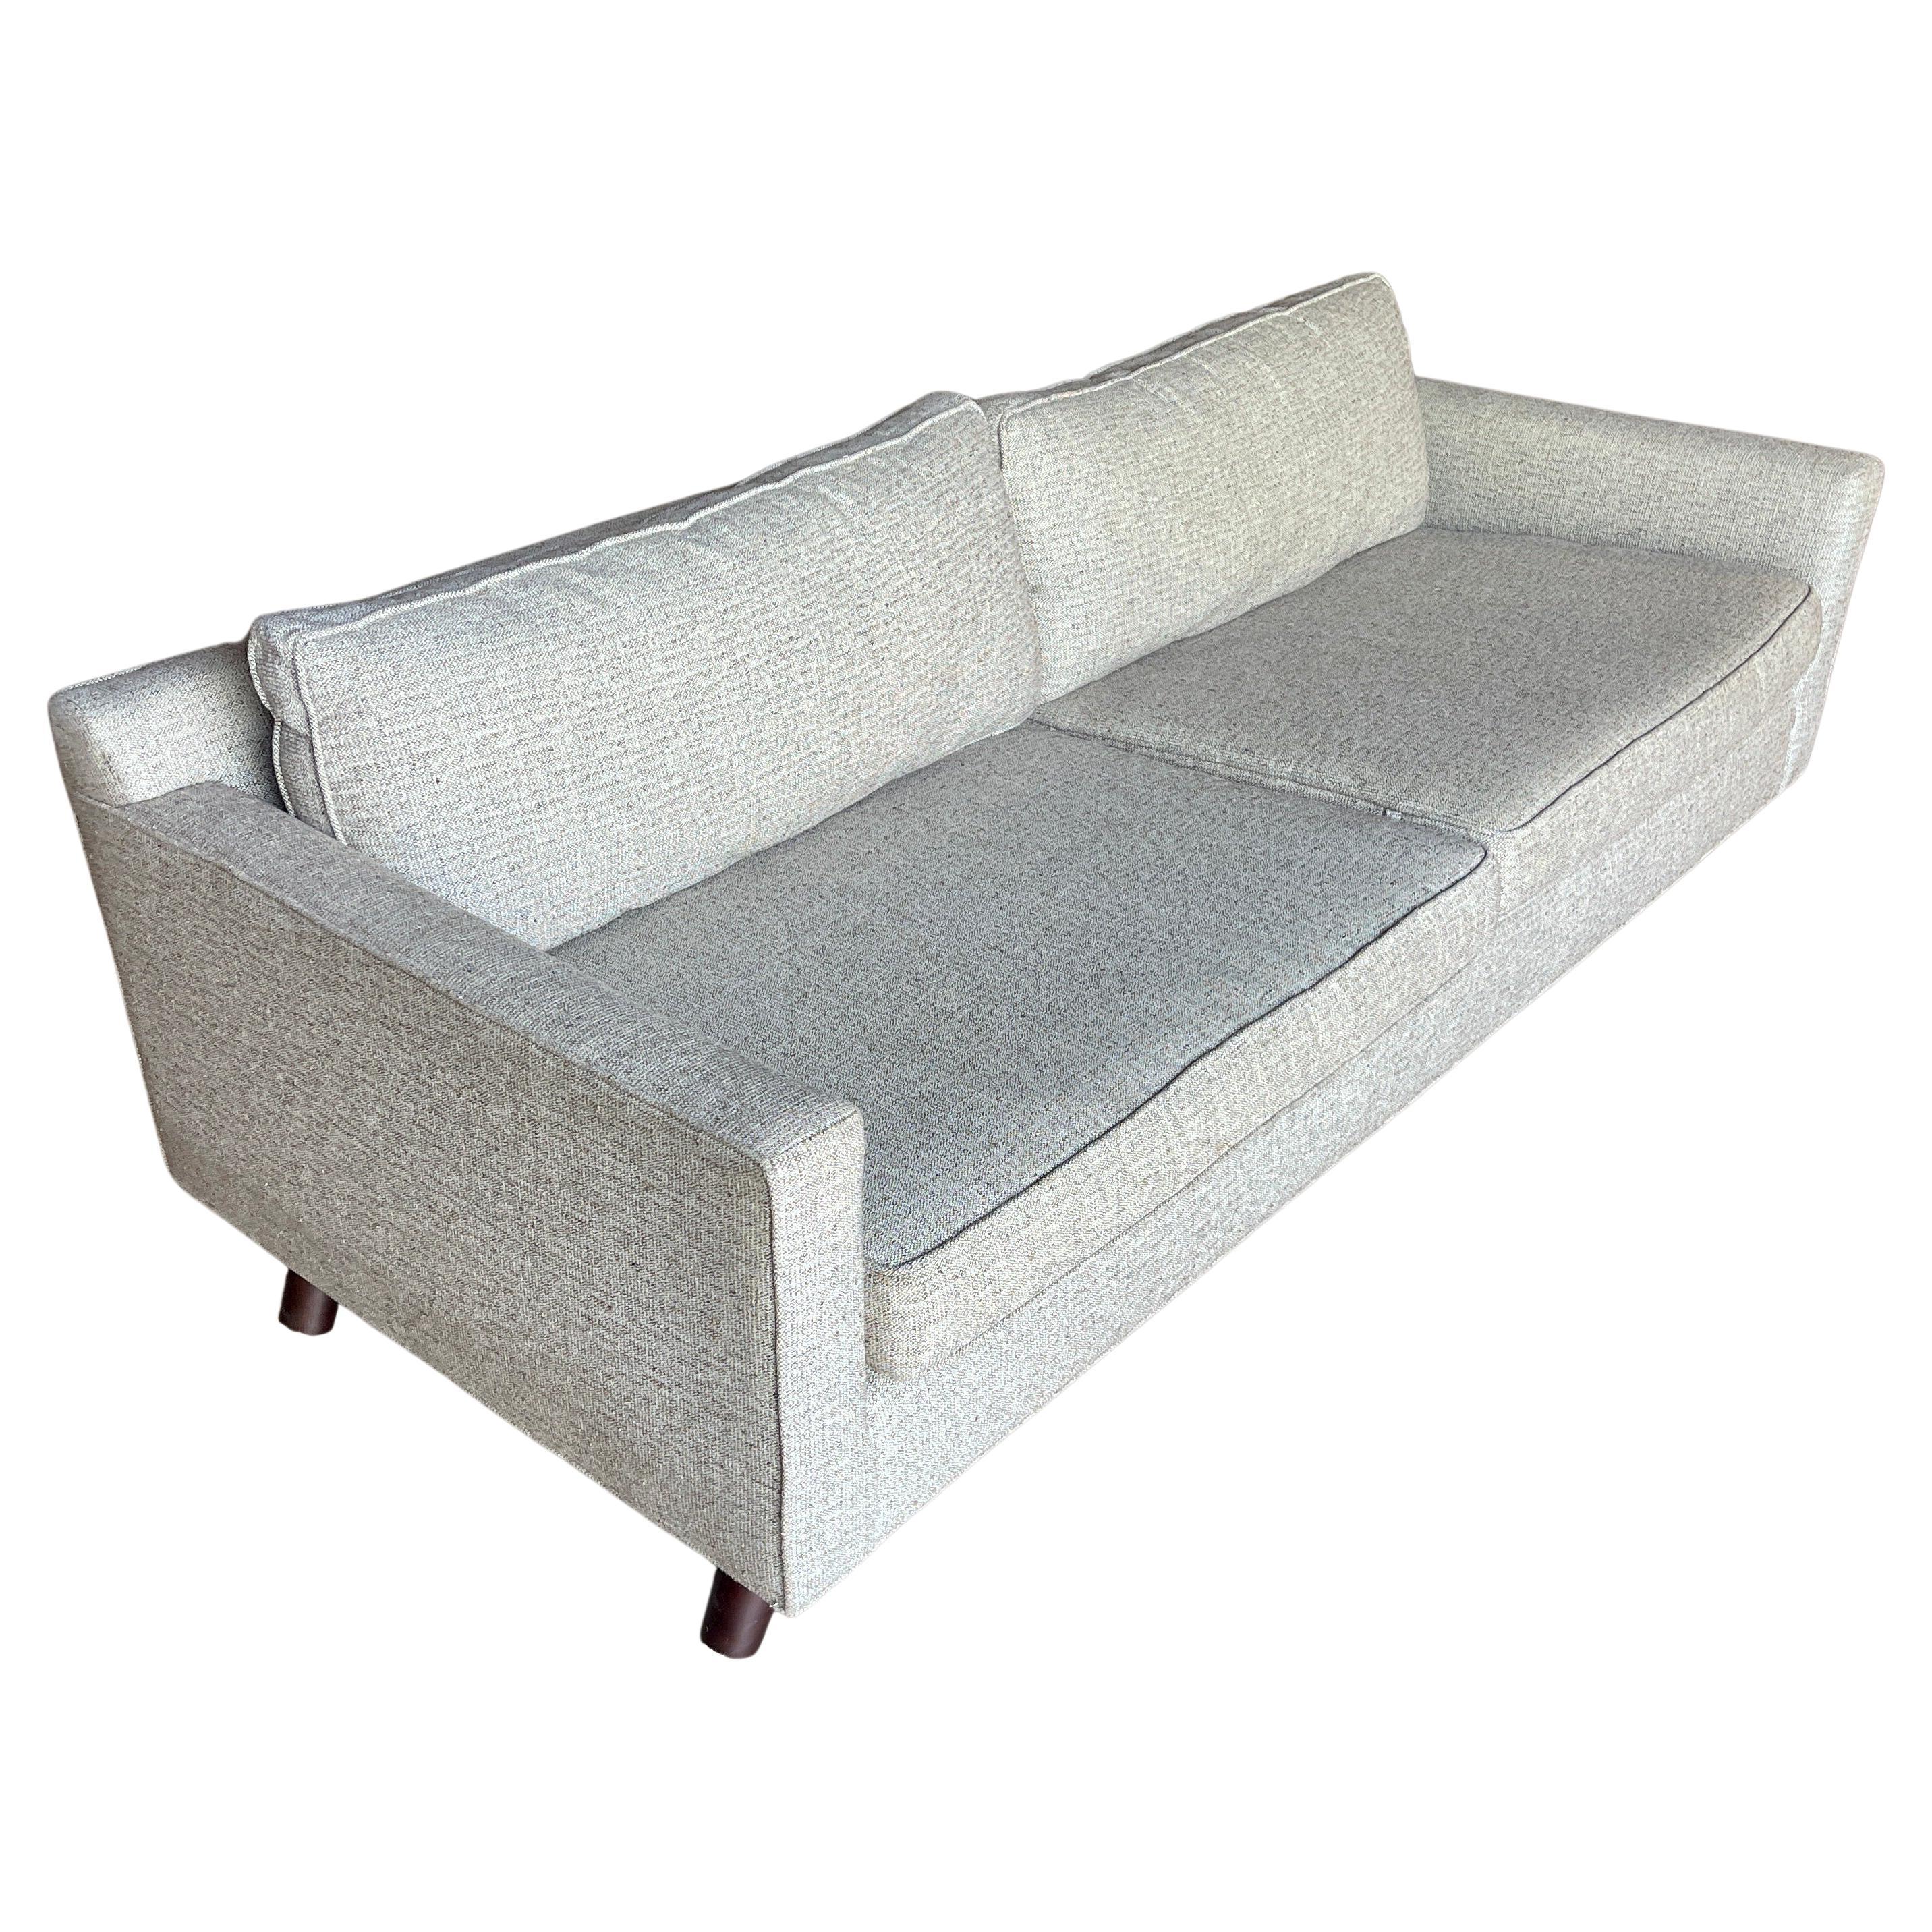 Mitchell Gold + Bob Williams Shelter Arm Sofa Modern Design

Sleek and sophisticated three person shelter arm sofa with two seat cushions and two back cushions in a very versatile and durable fabric. Mitchell Gold and Bob Williams are about